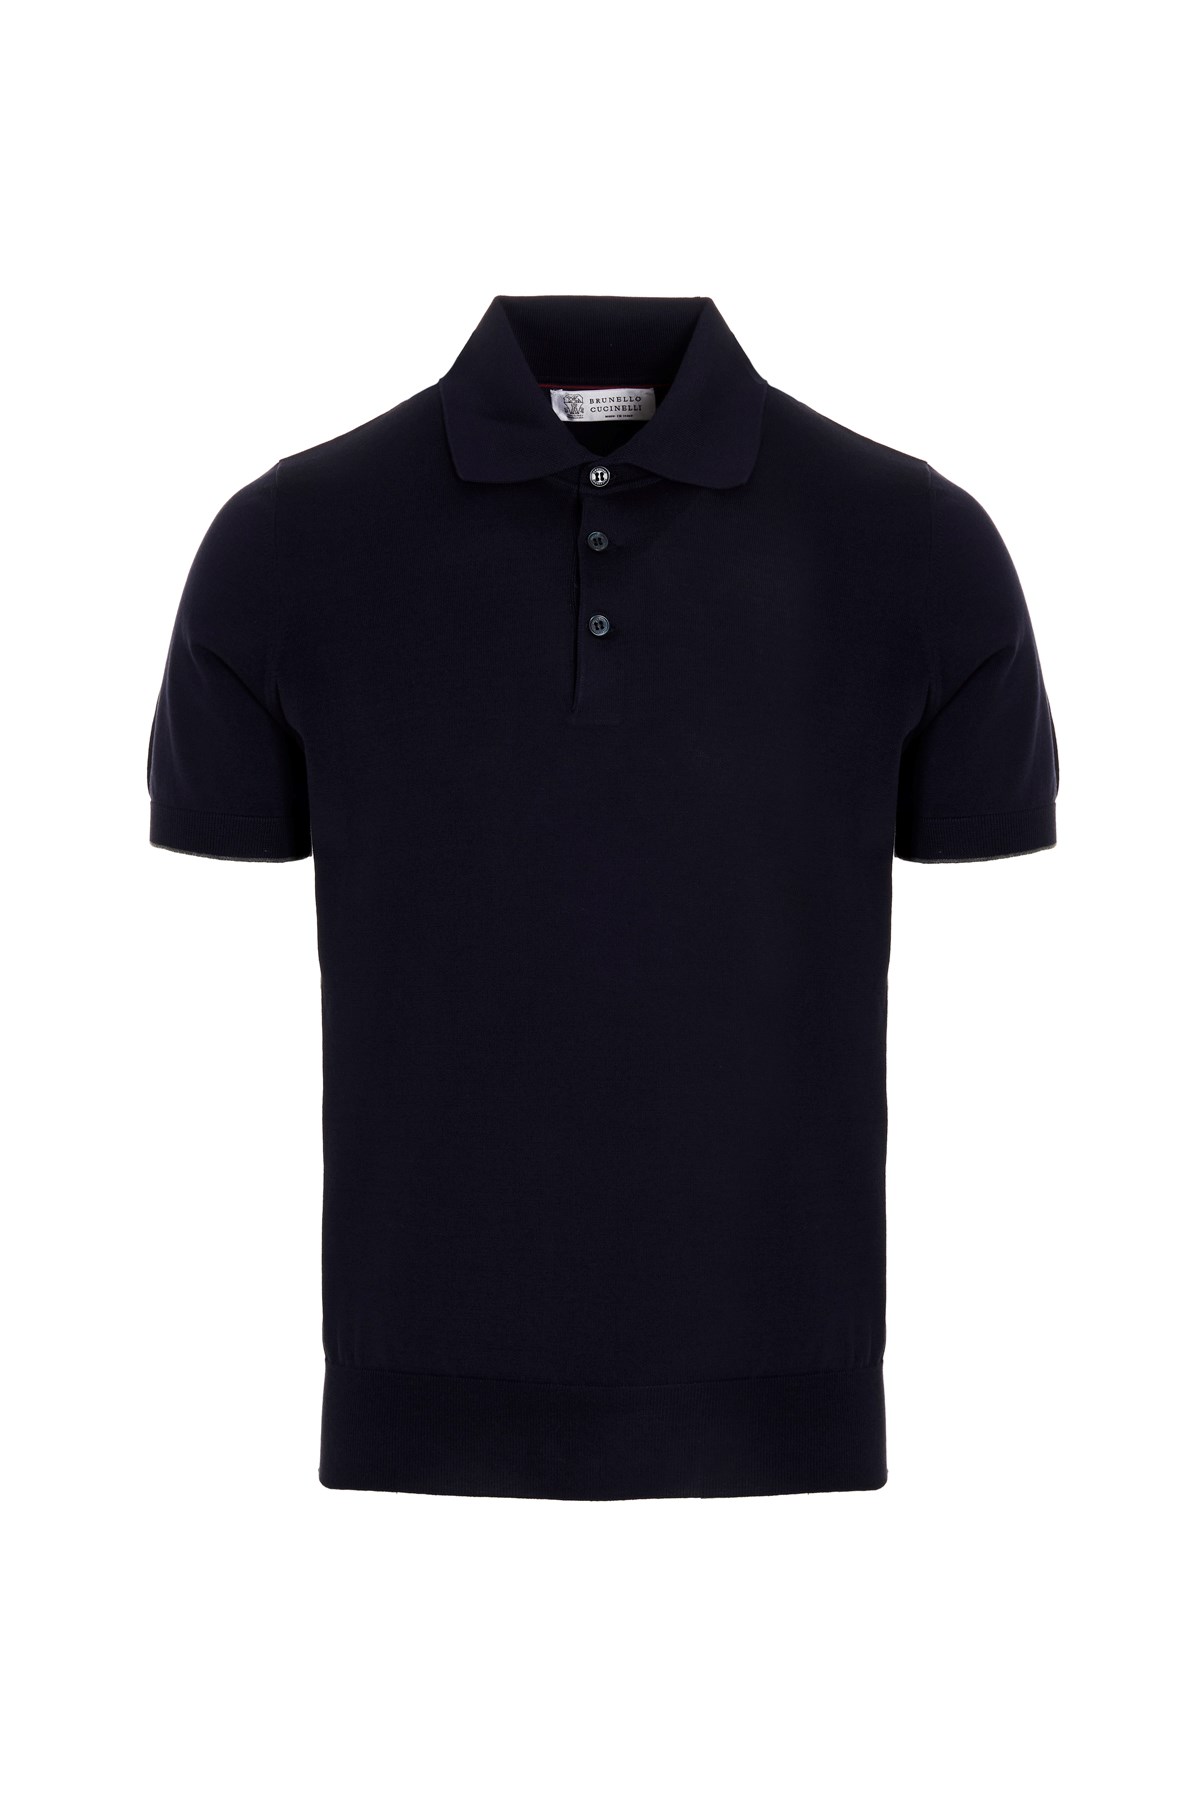 BRUNELLO CUCINELLI Cotton Knitted Polo Shirt